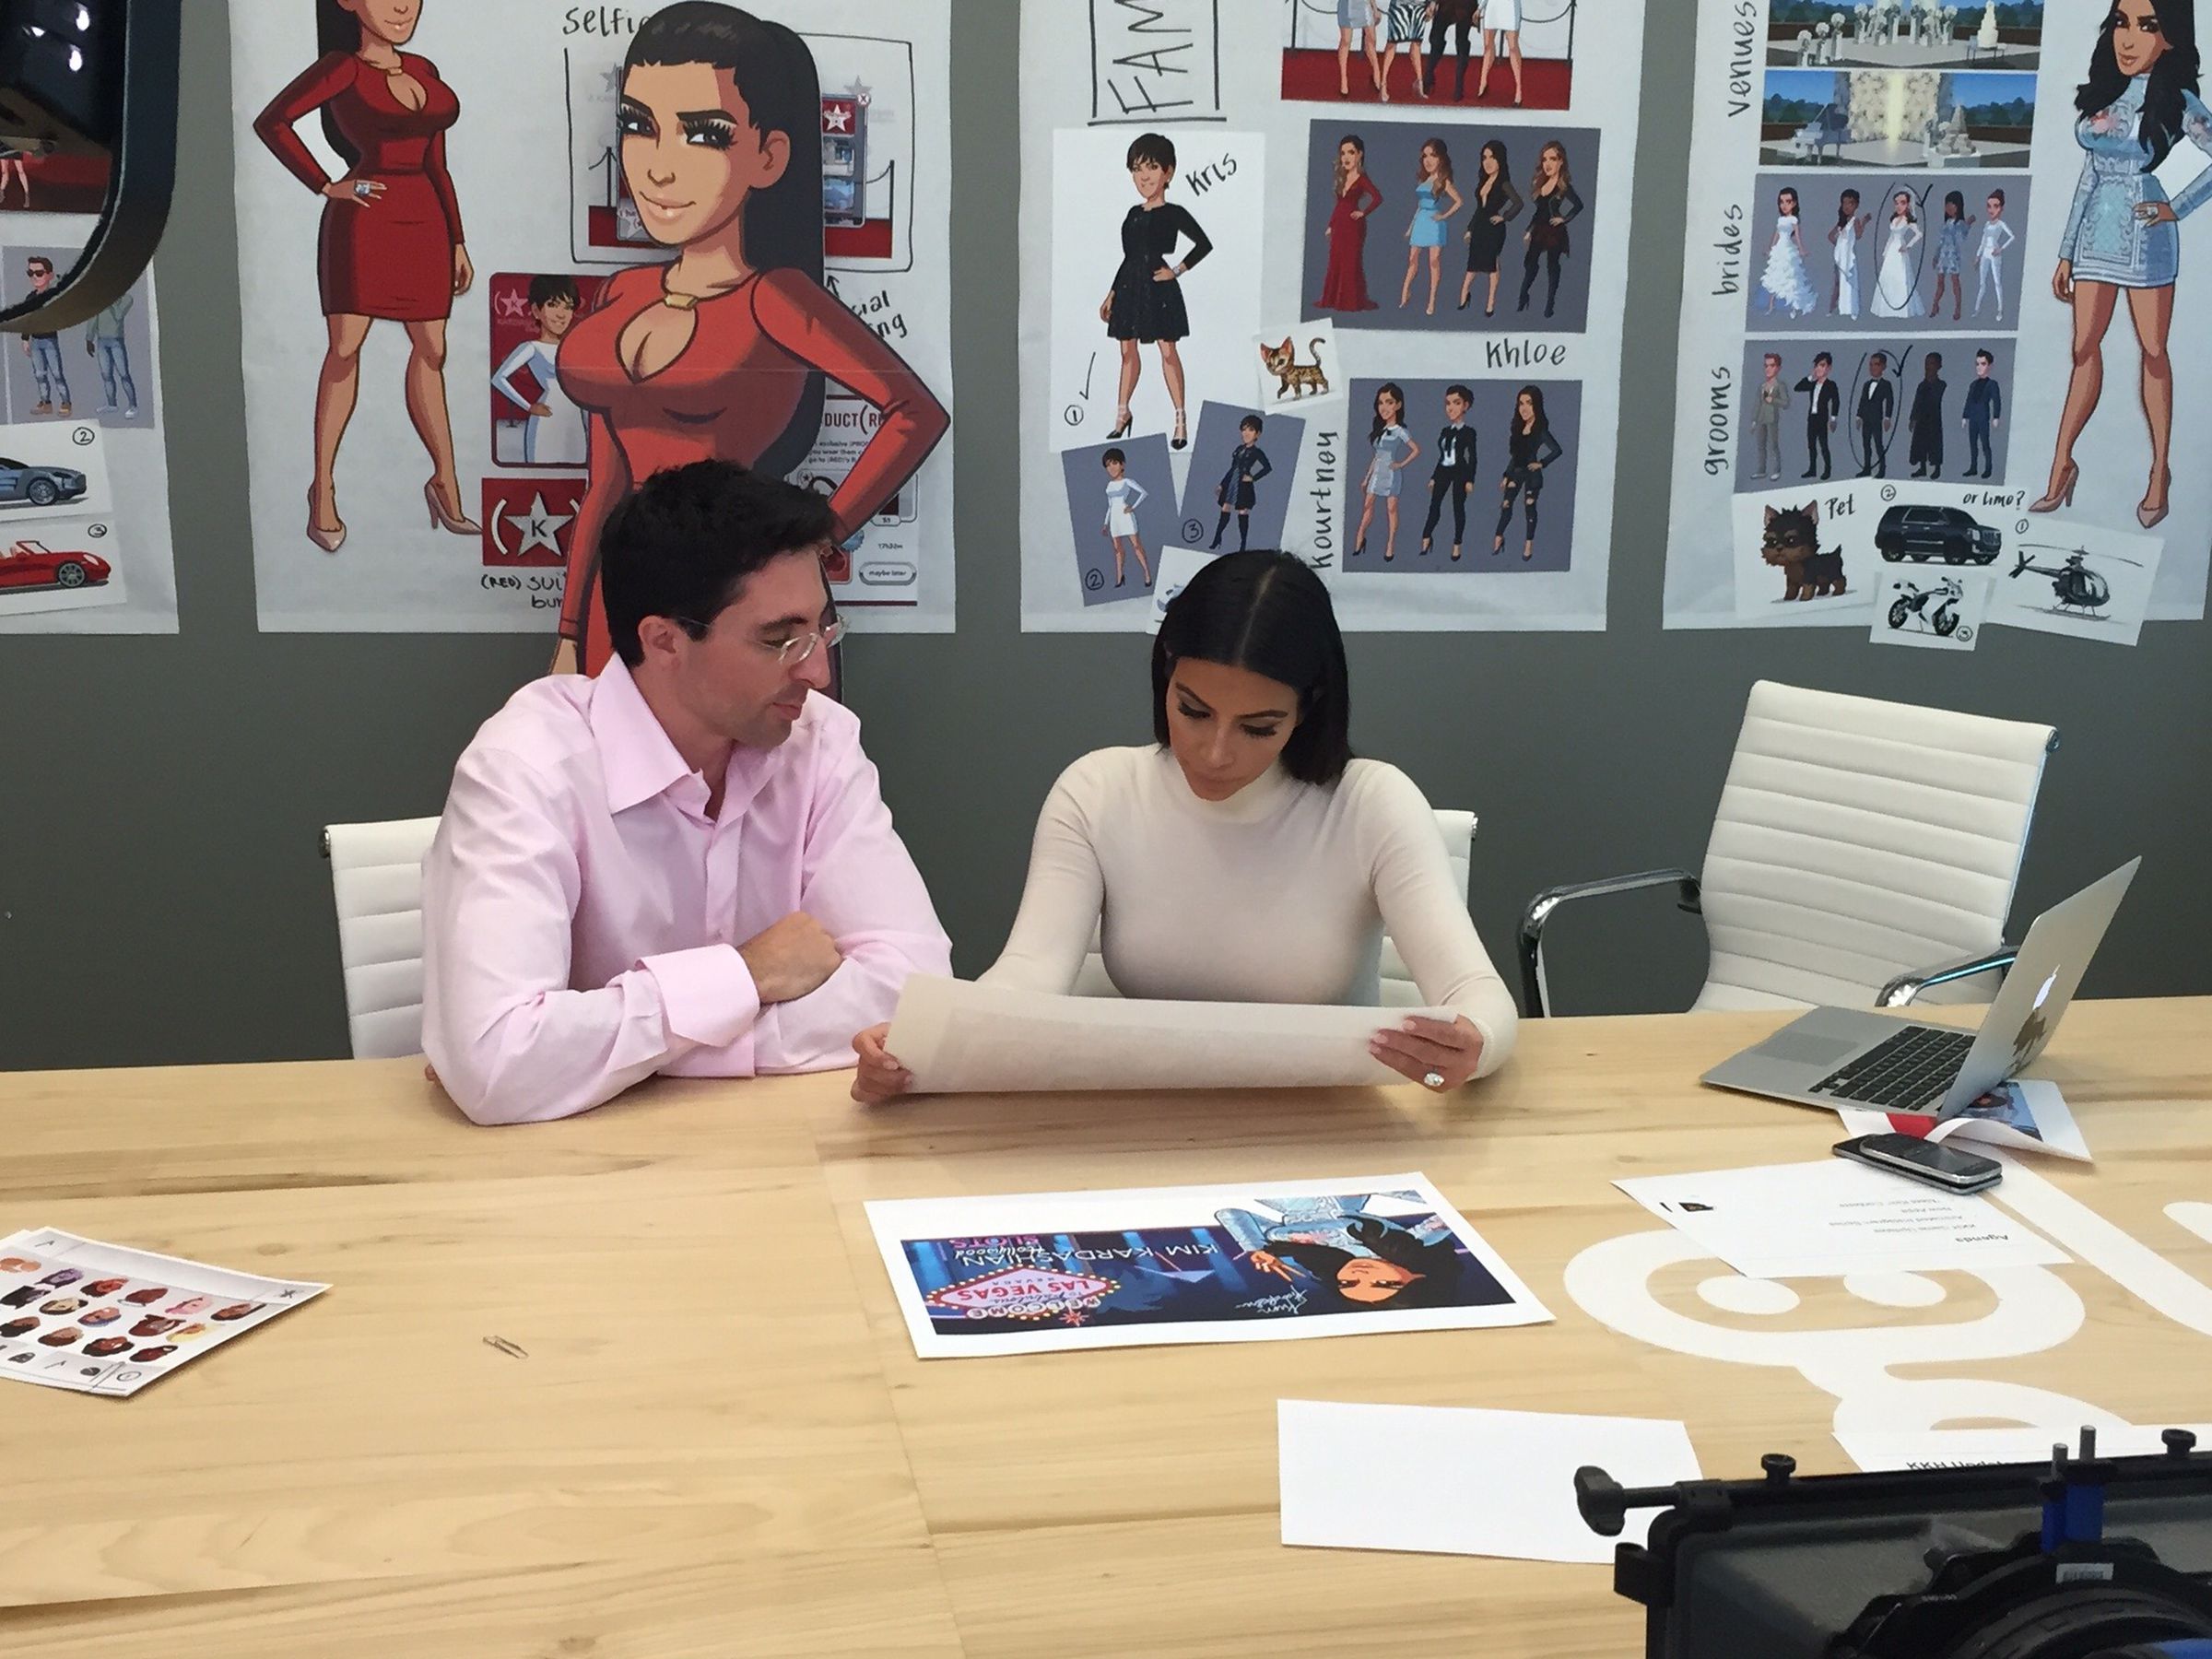 Kim Kardashian at a desk in the Glu Mobile offices looking over designs for the game, with concept art on the wall behind her